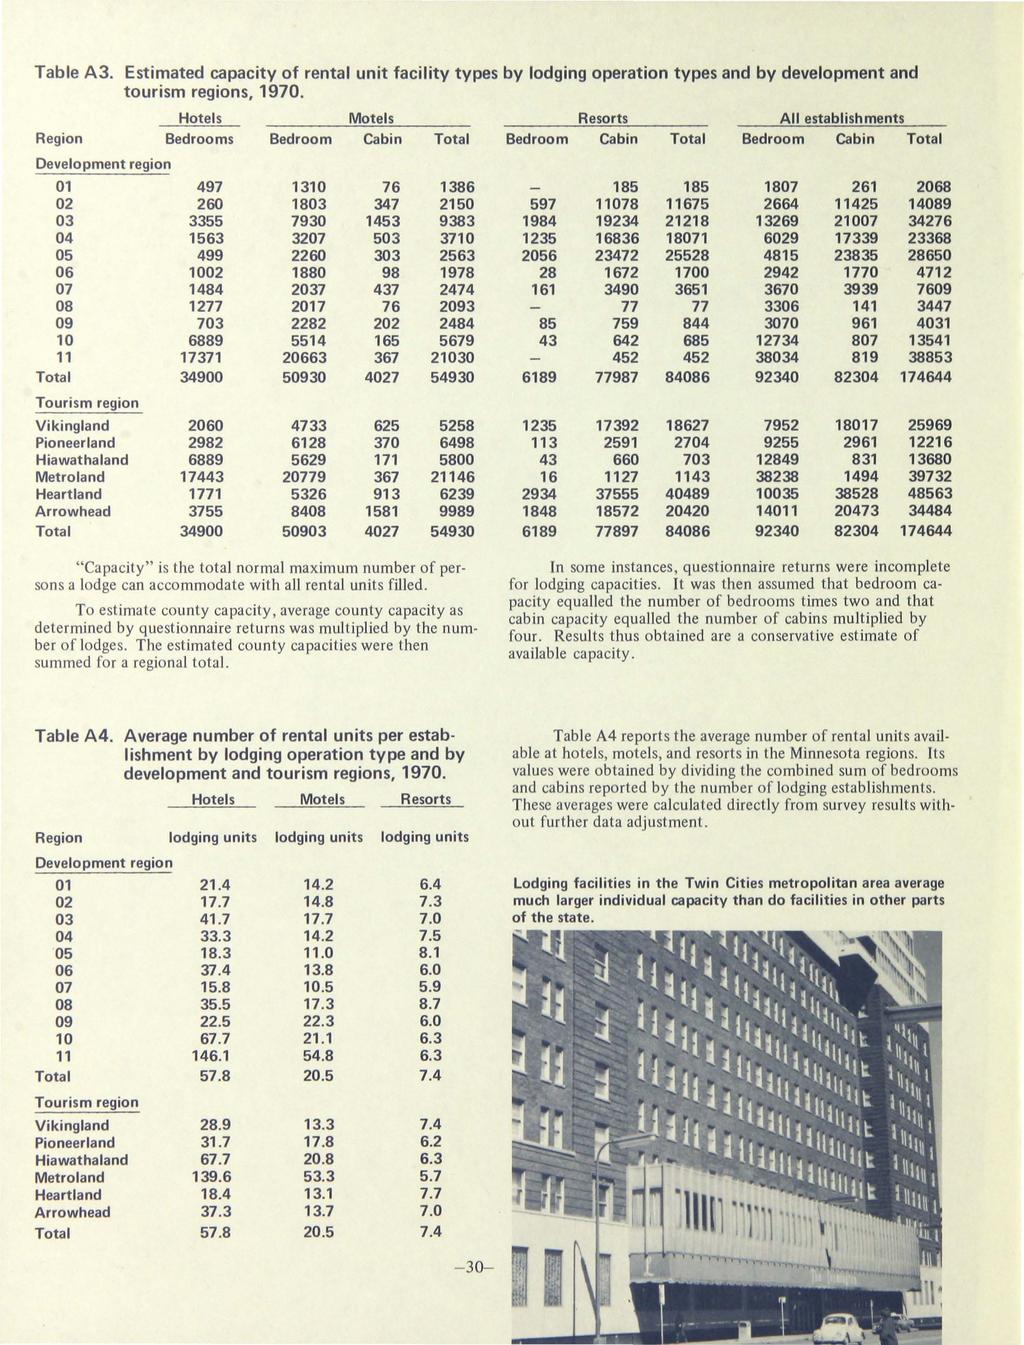 Table A3. Estimated capacity of rental unit facility types by lodging operation types and by development and tourism regions, 1970.